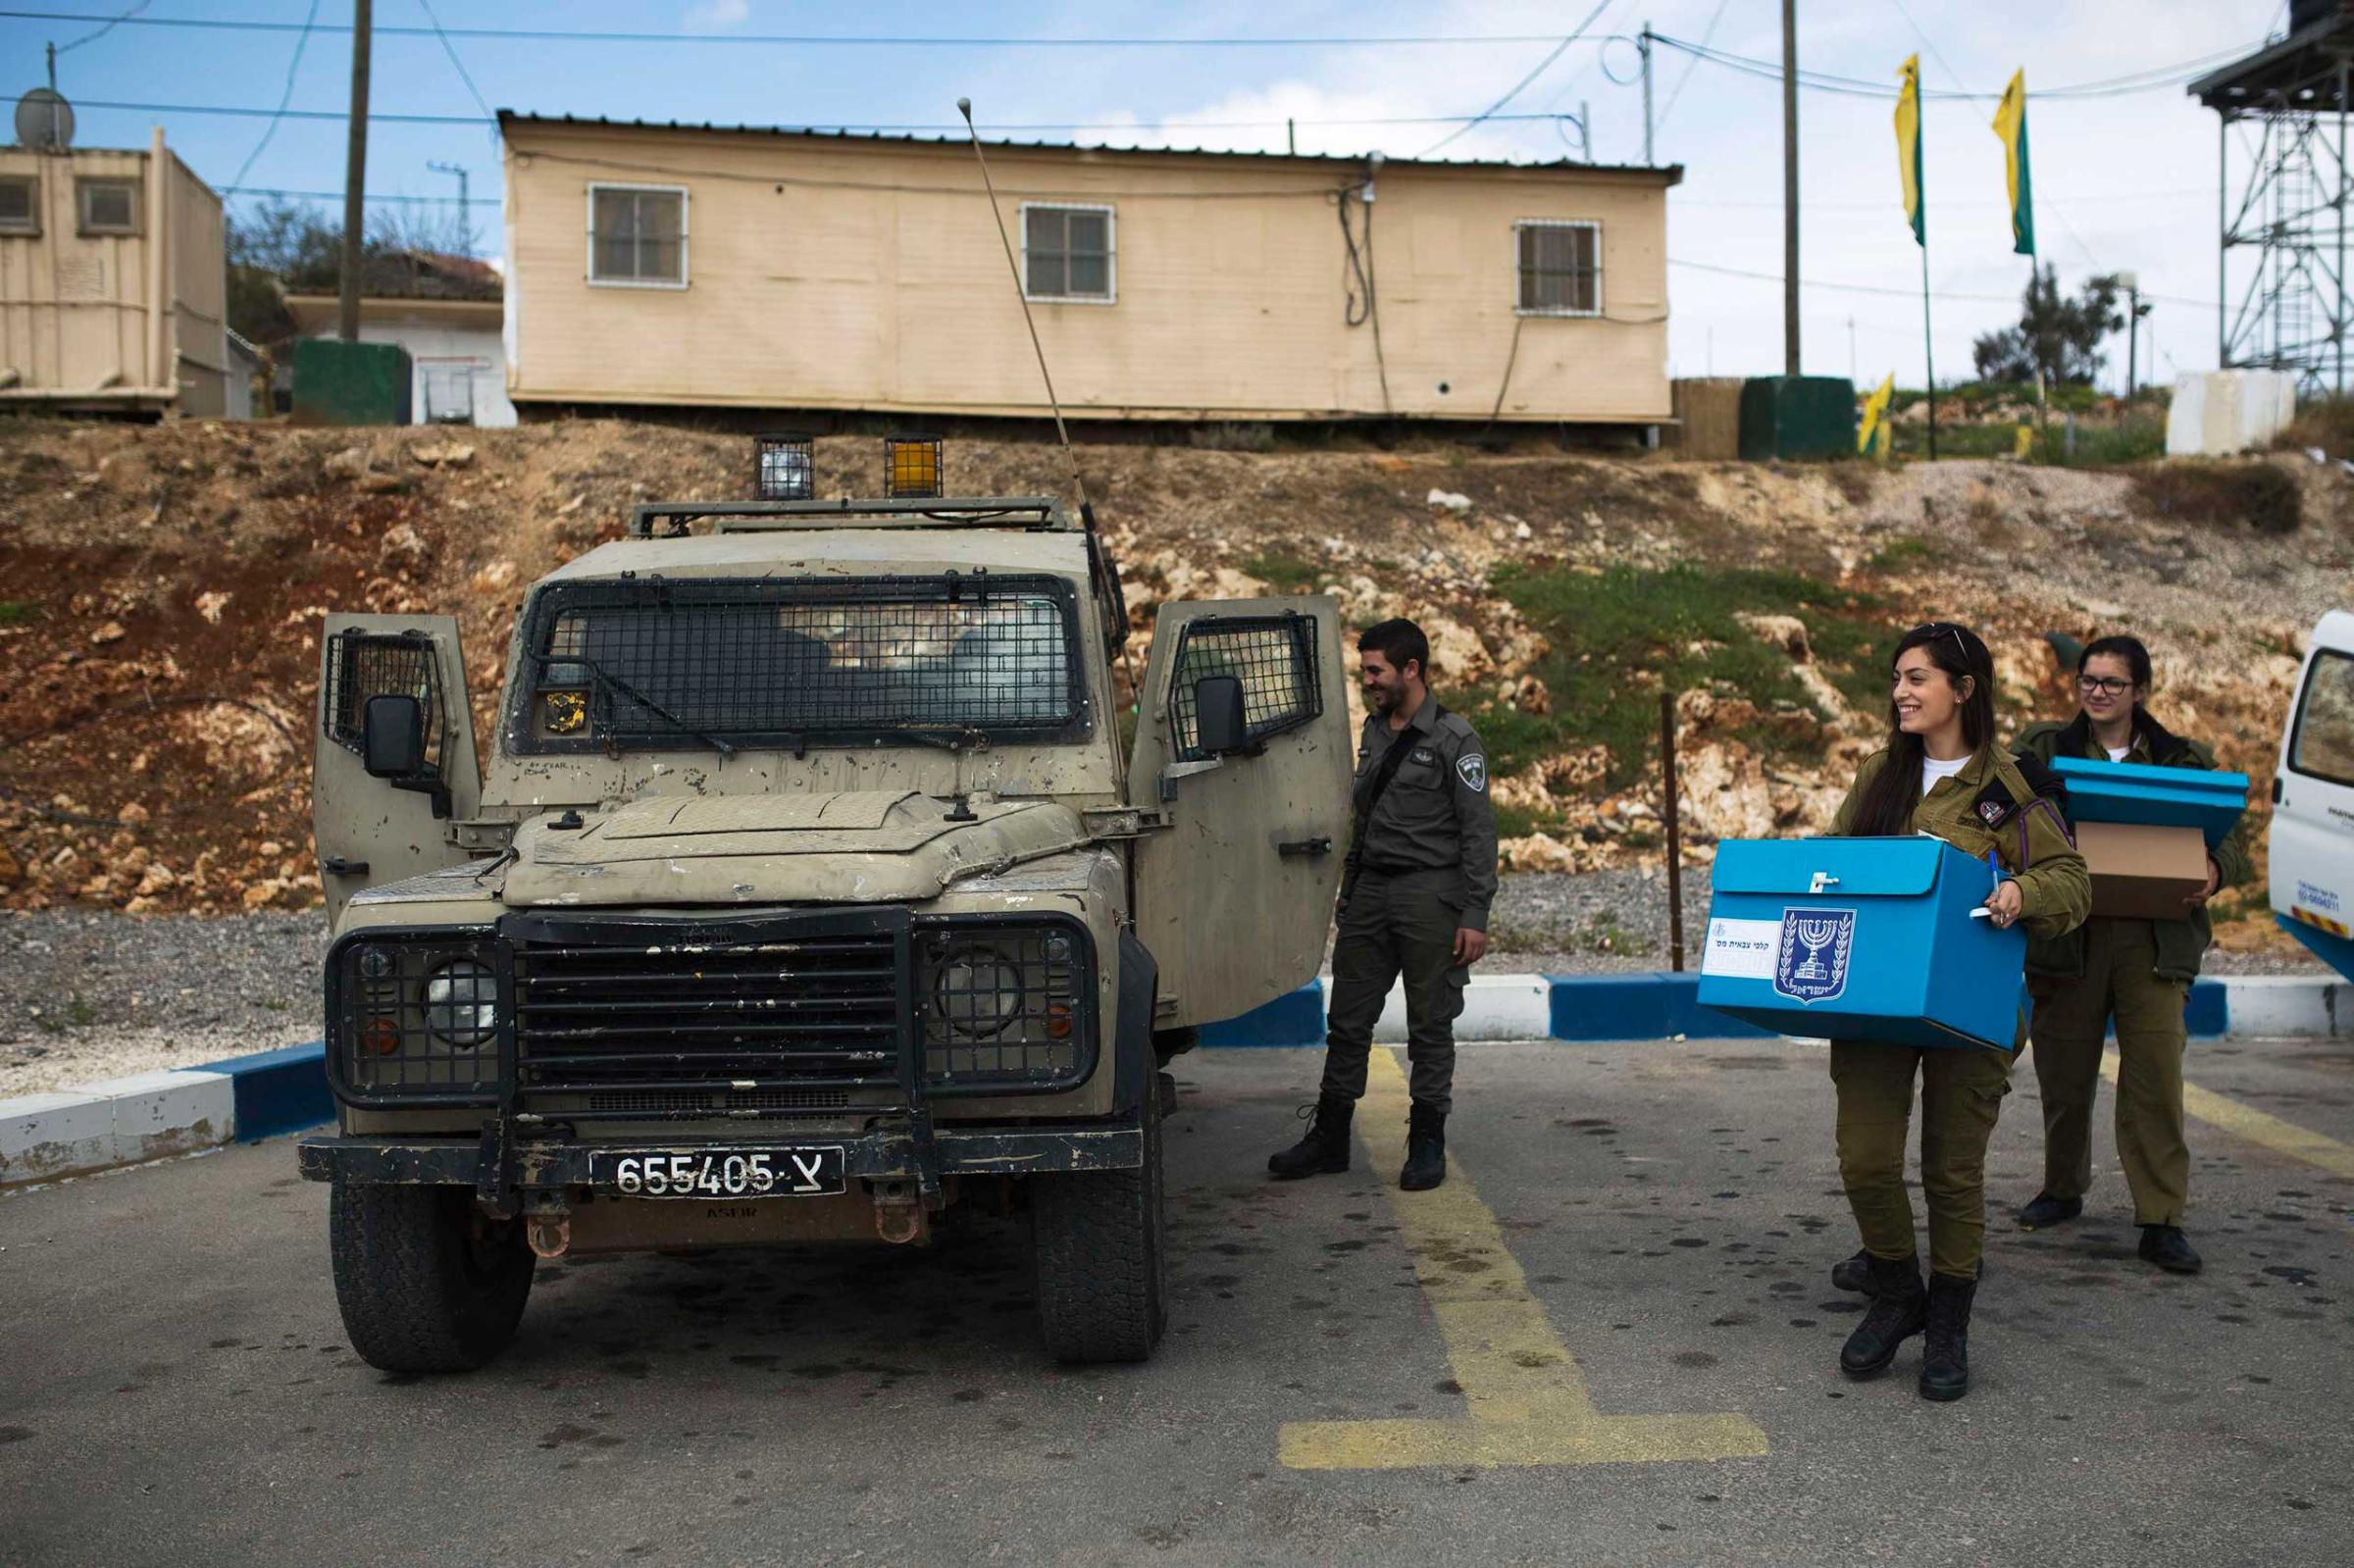 An Israeli soldier carries a mobile ballot box at a border police base in the West Bank near Nablus March 17, 2015.